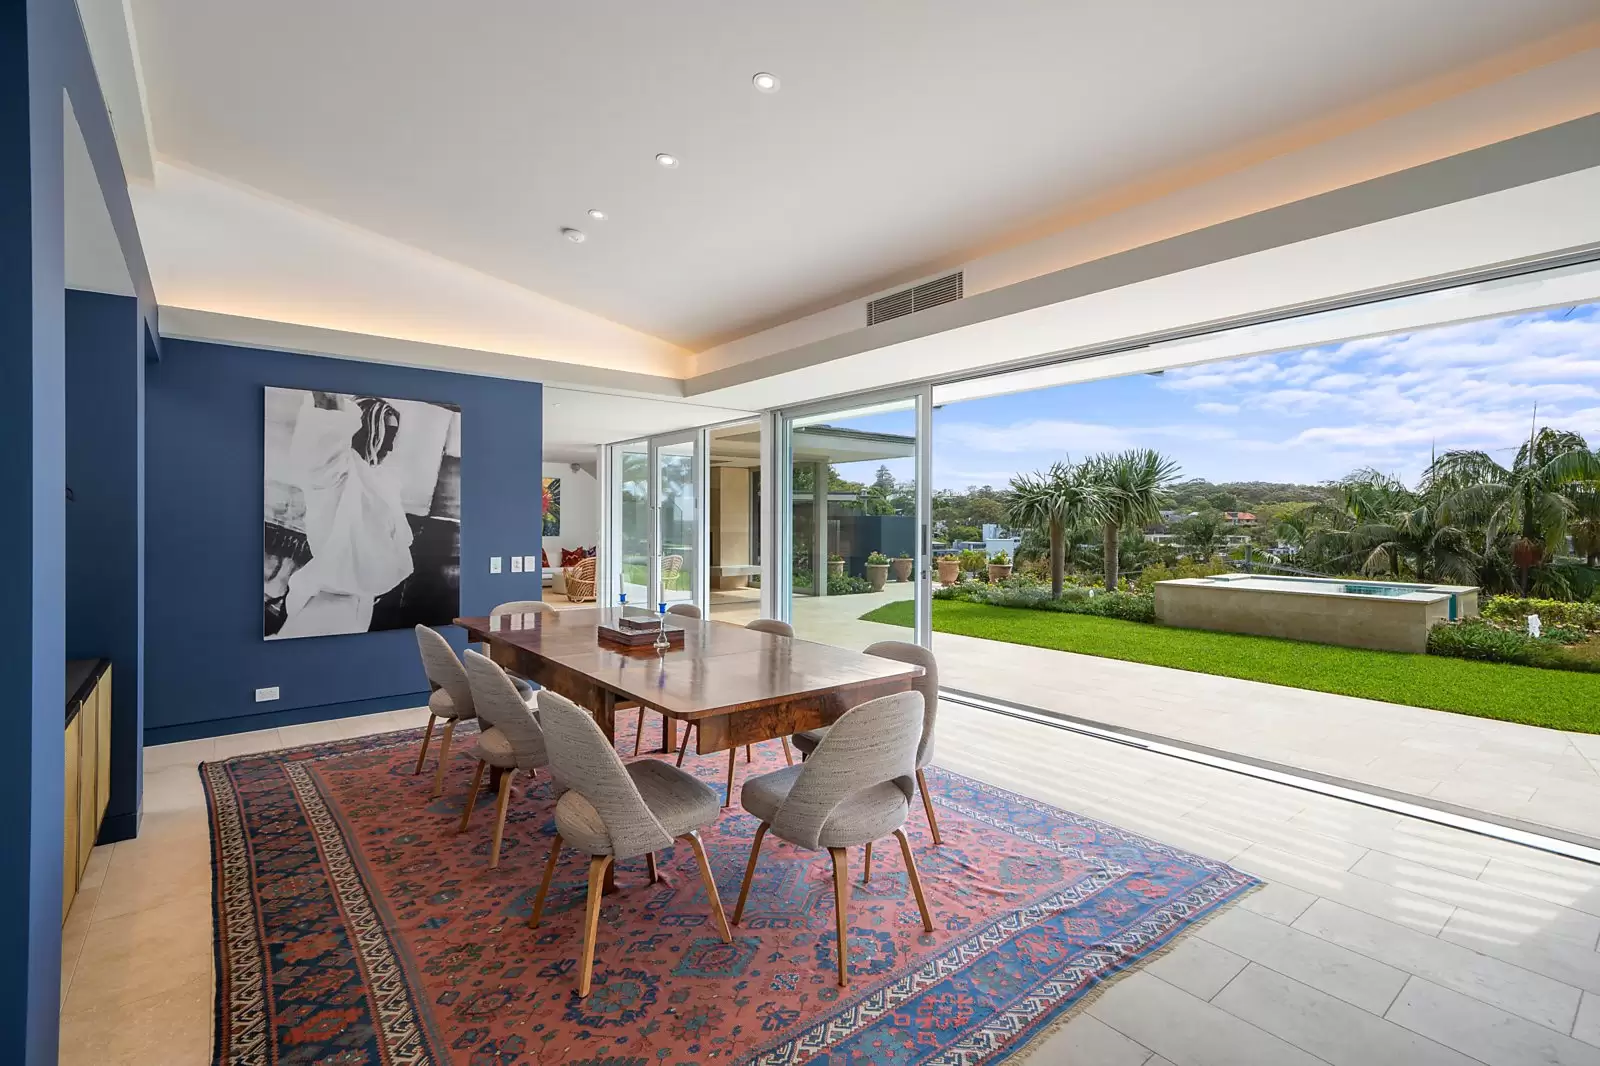 Photo #12: 97 Wentworth Road, Vaucluse - For Sale by Sydney Sotheby's International Realty